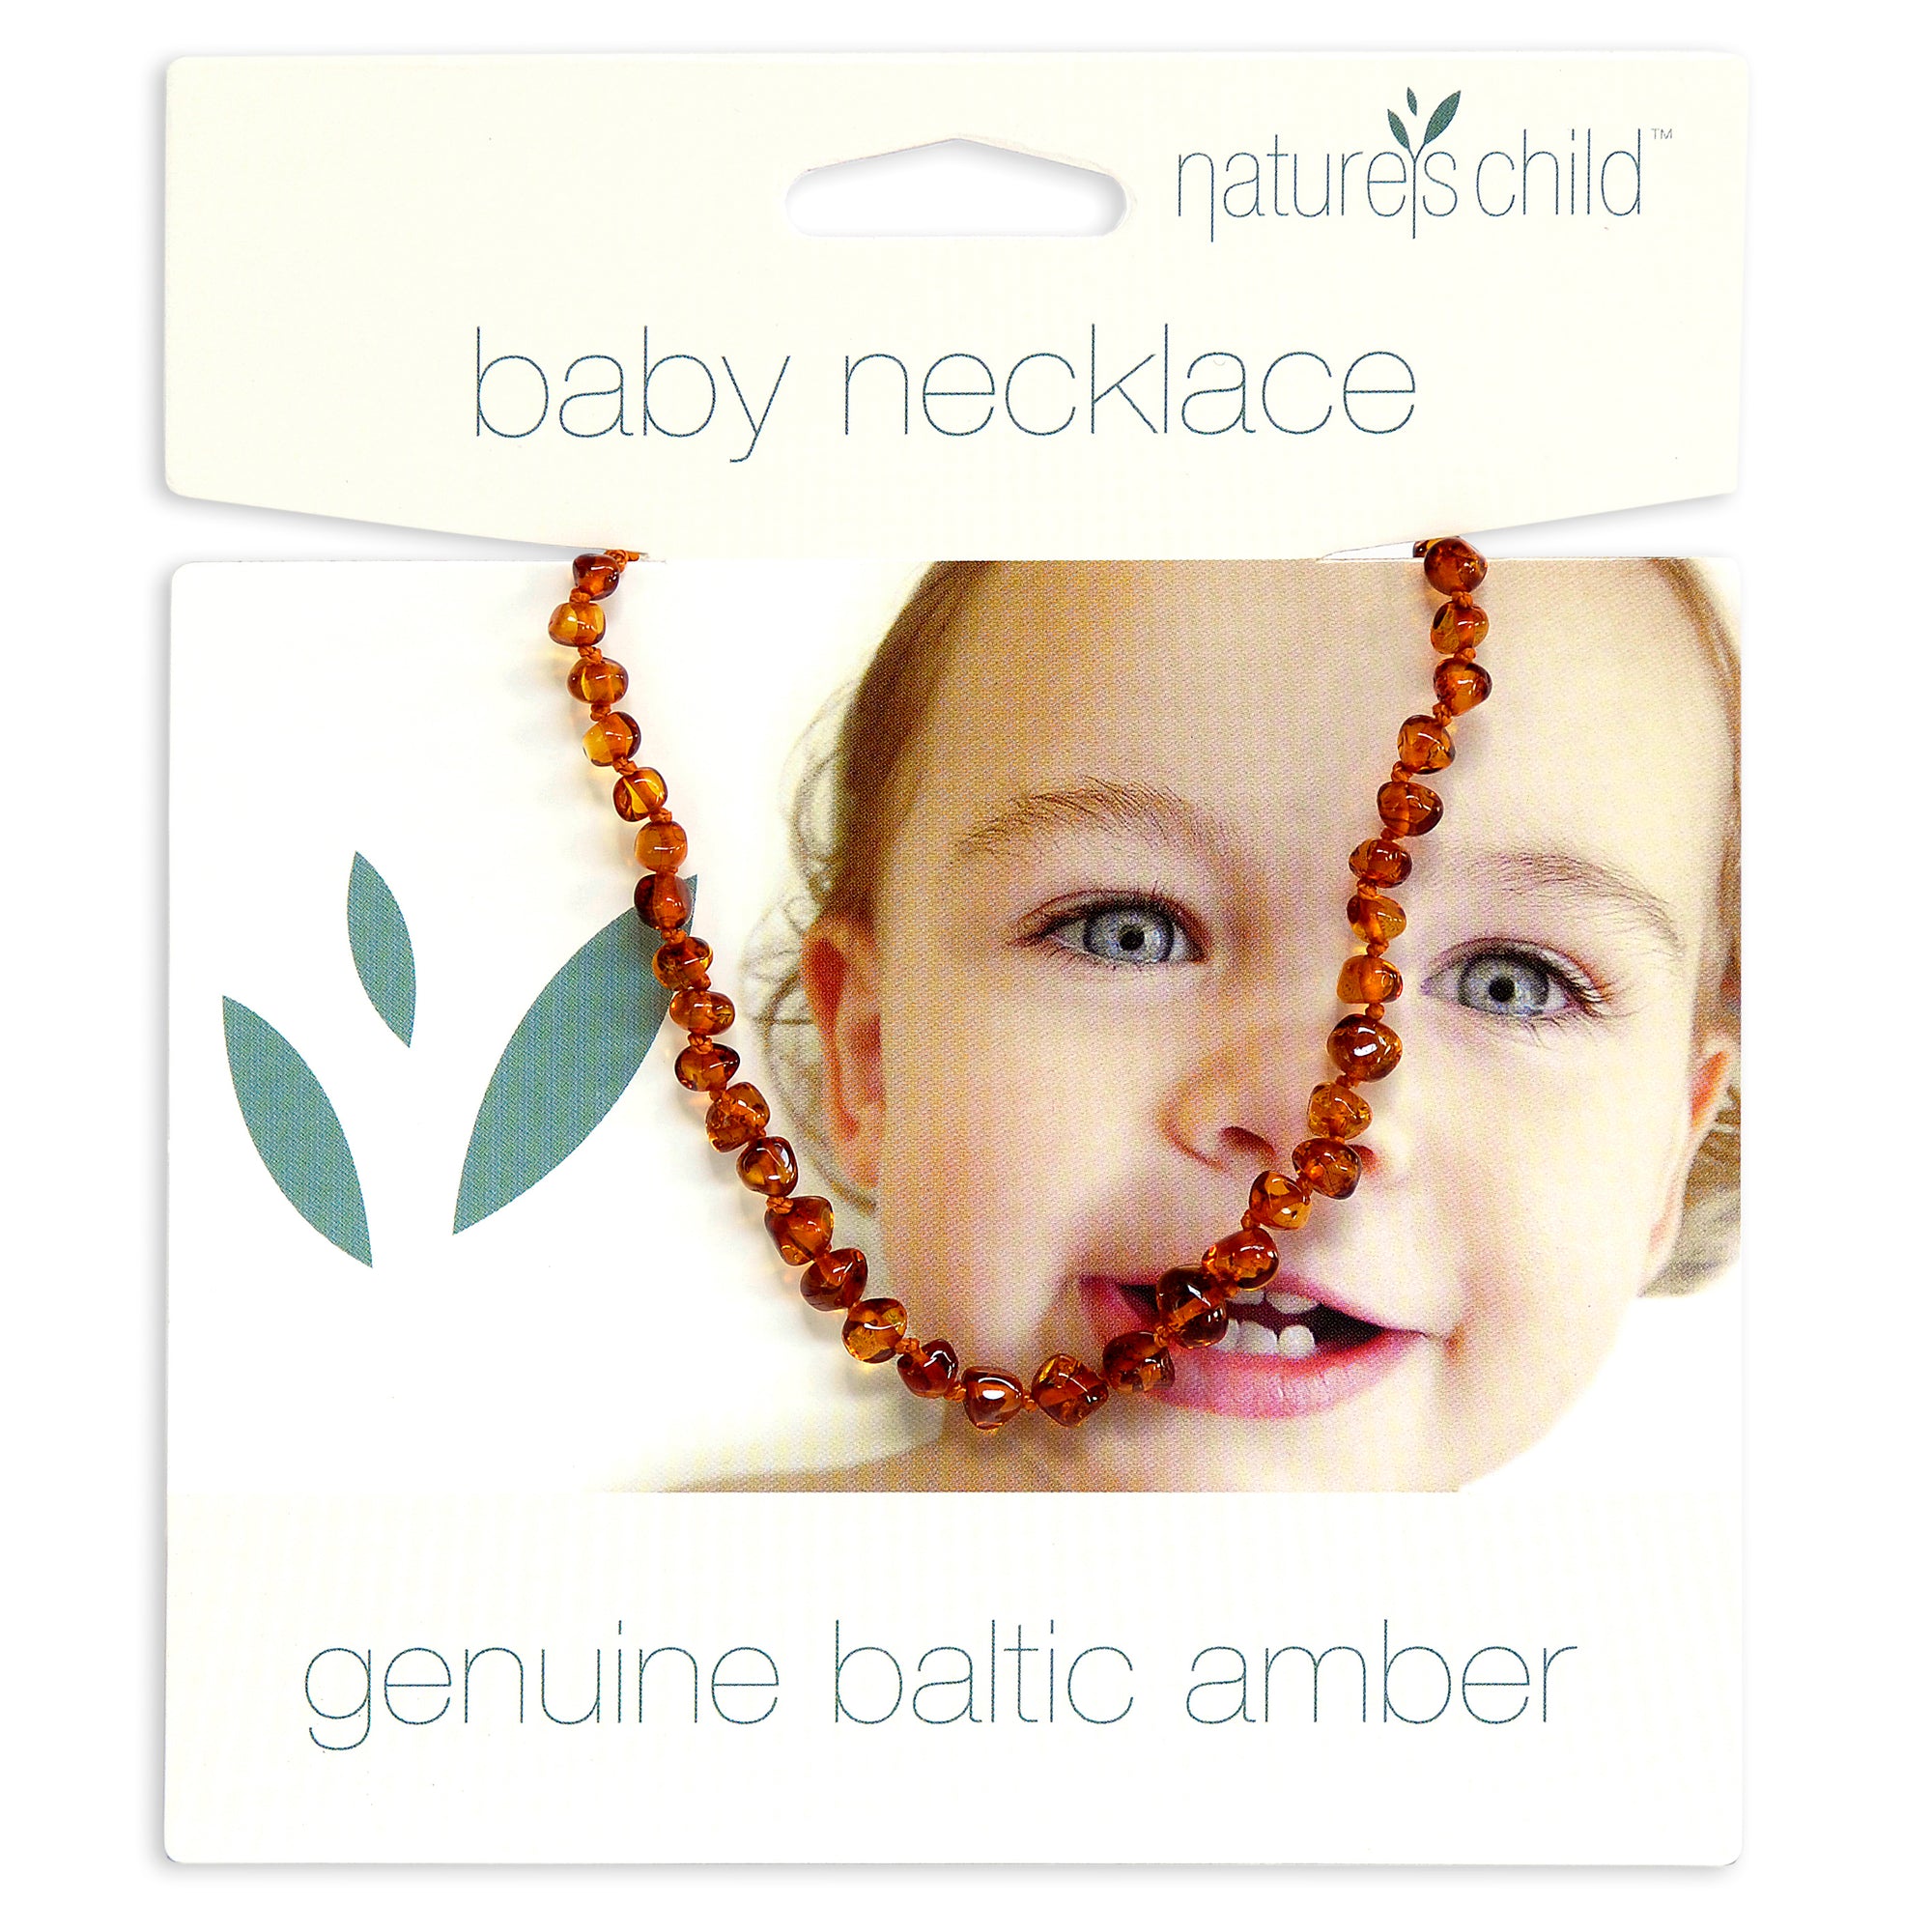 Baby necklace by Nature's Child made with genuine baltic amber. Fits a baby from 3 months to 7 years old. Worn by all Australian children. Part of a green parenting style. natural parenting with healing properties. Cognac honey gold colour of rich amber. jewellery for babies, toddlers and children. Natural amber beaded necklace for infants. 